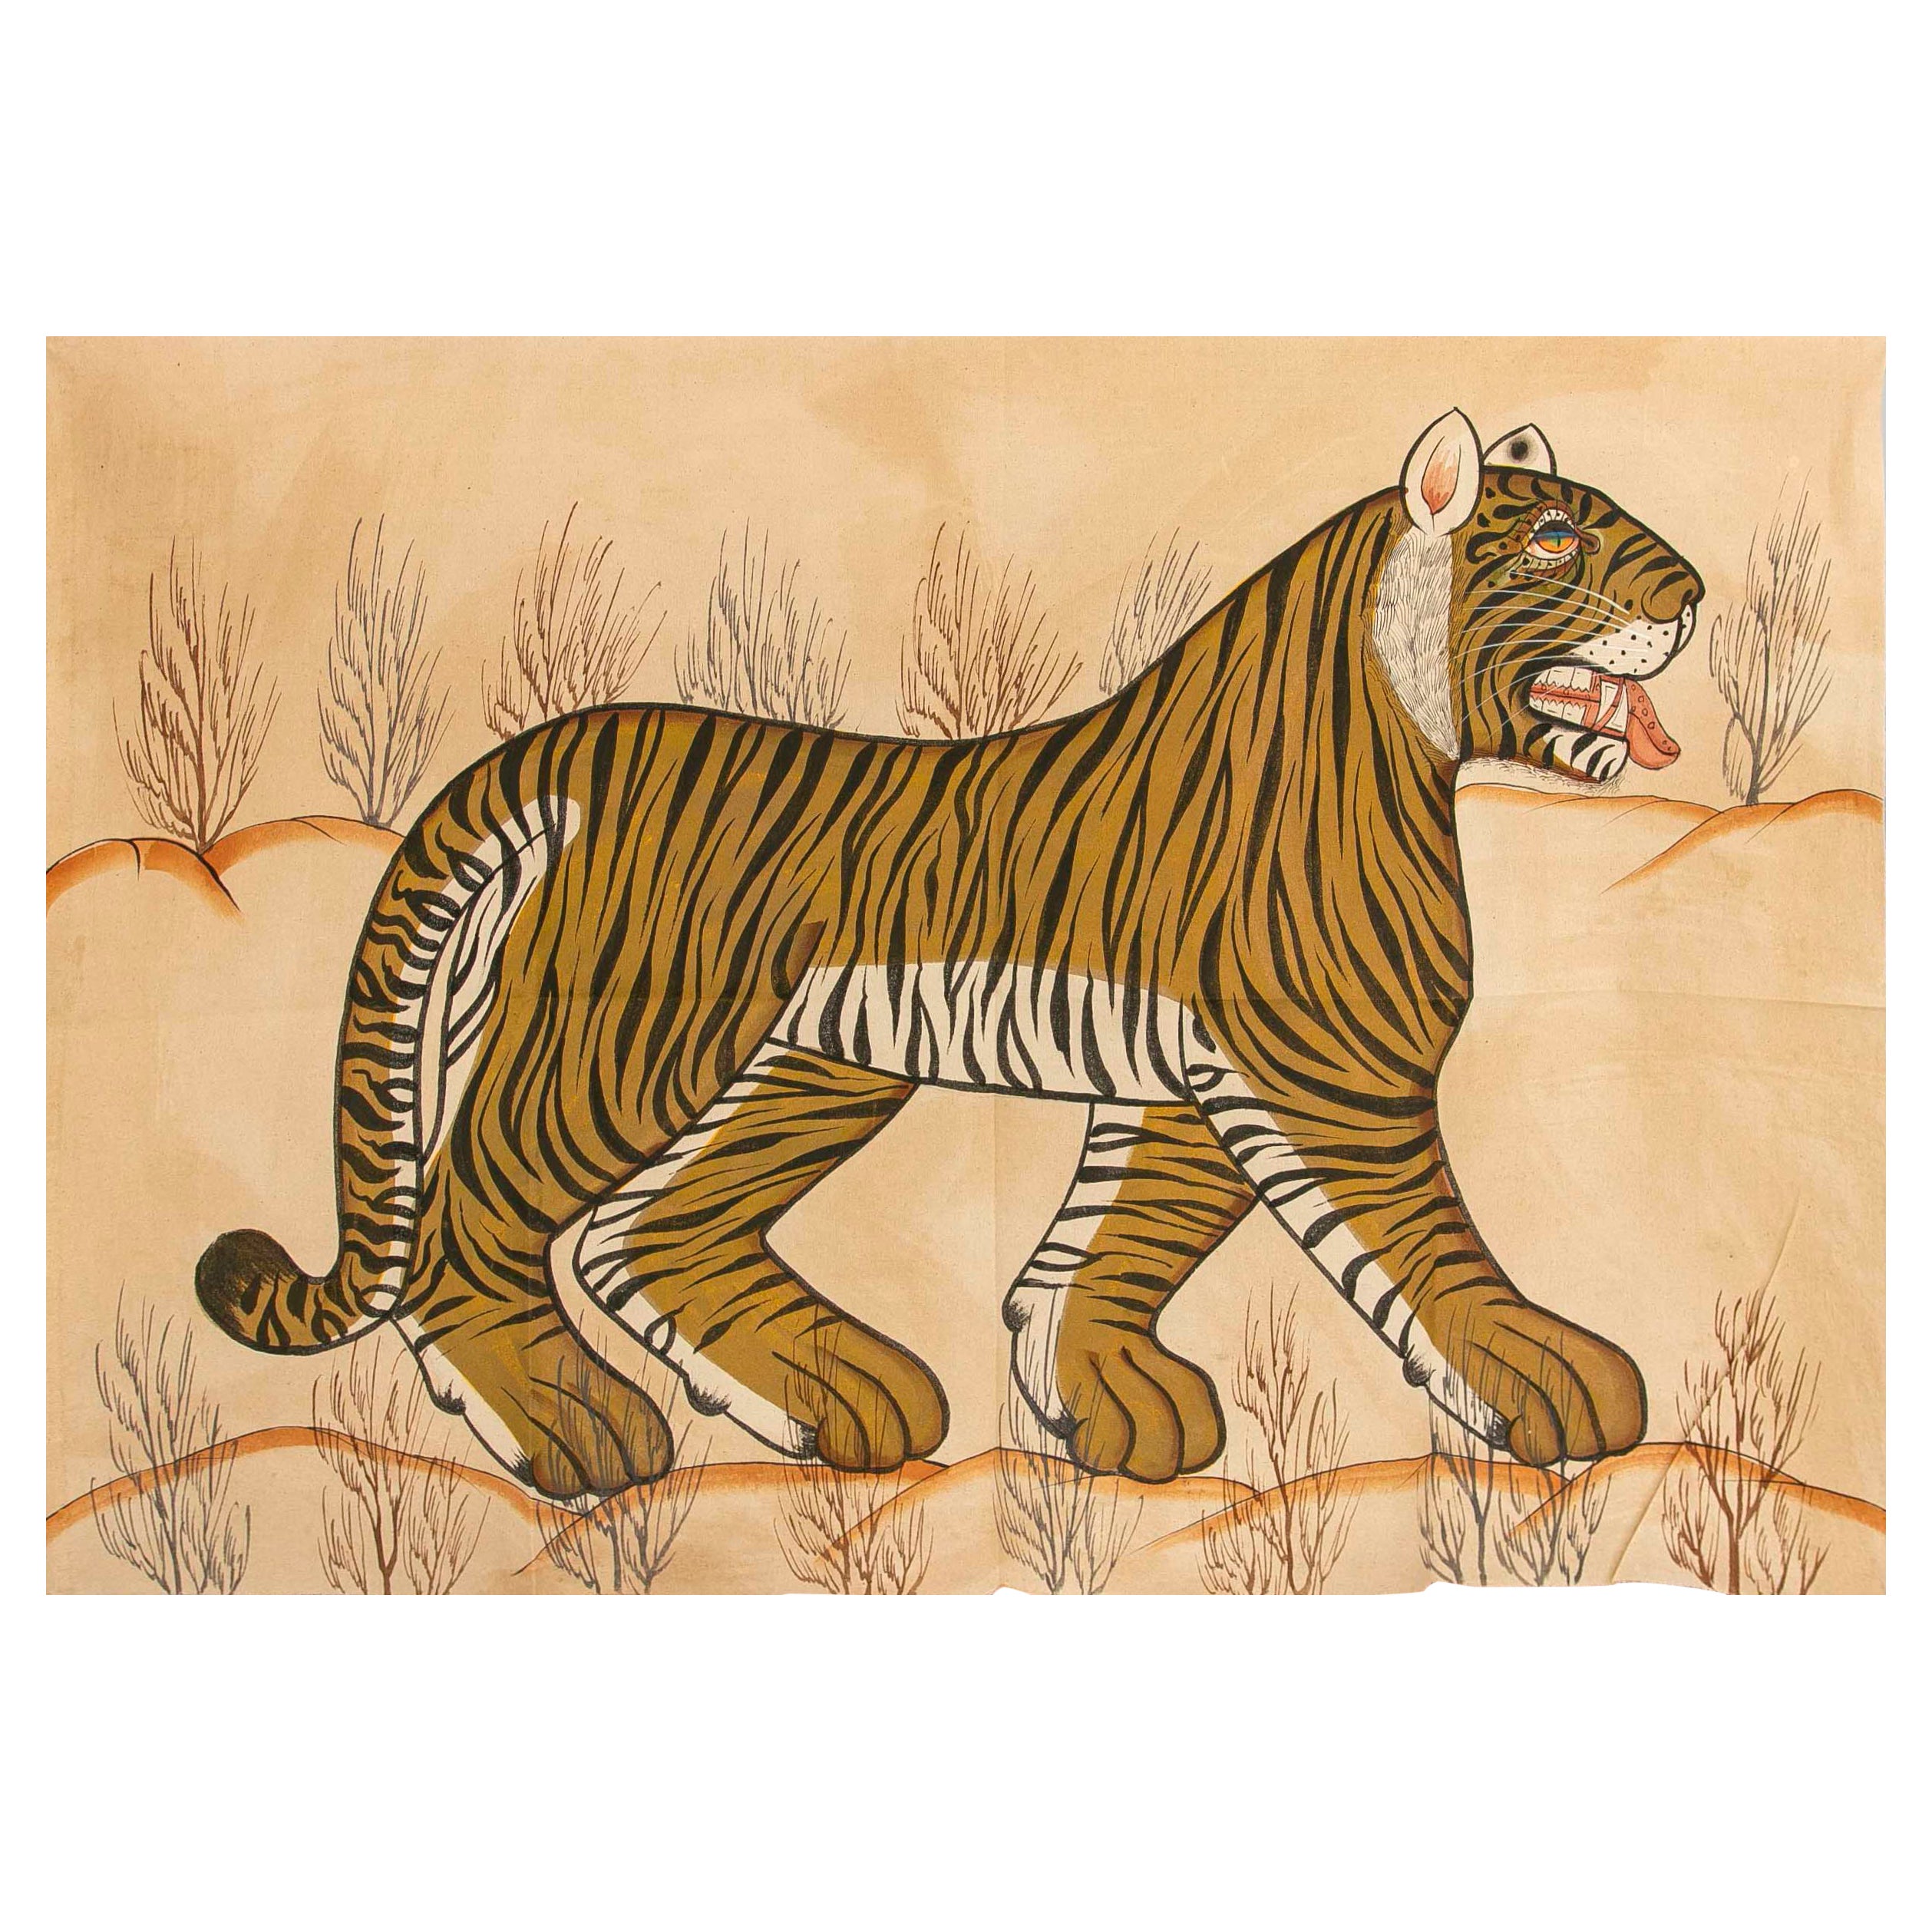 1970s Jaime Parlade Designer Hand Painting "Tiger" Oil on Canvas For Sale